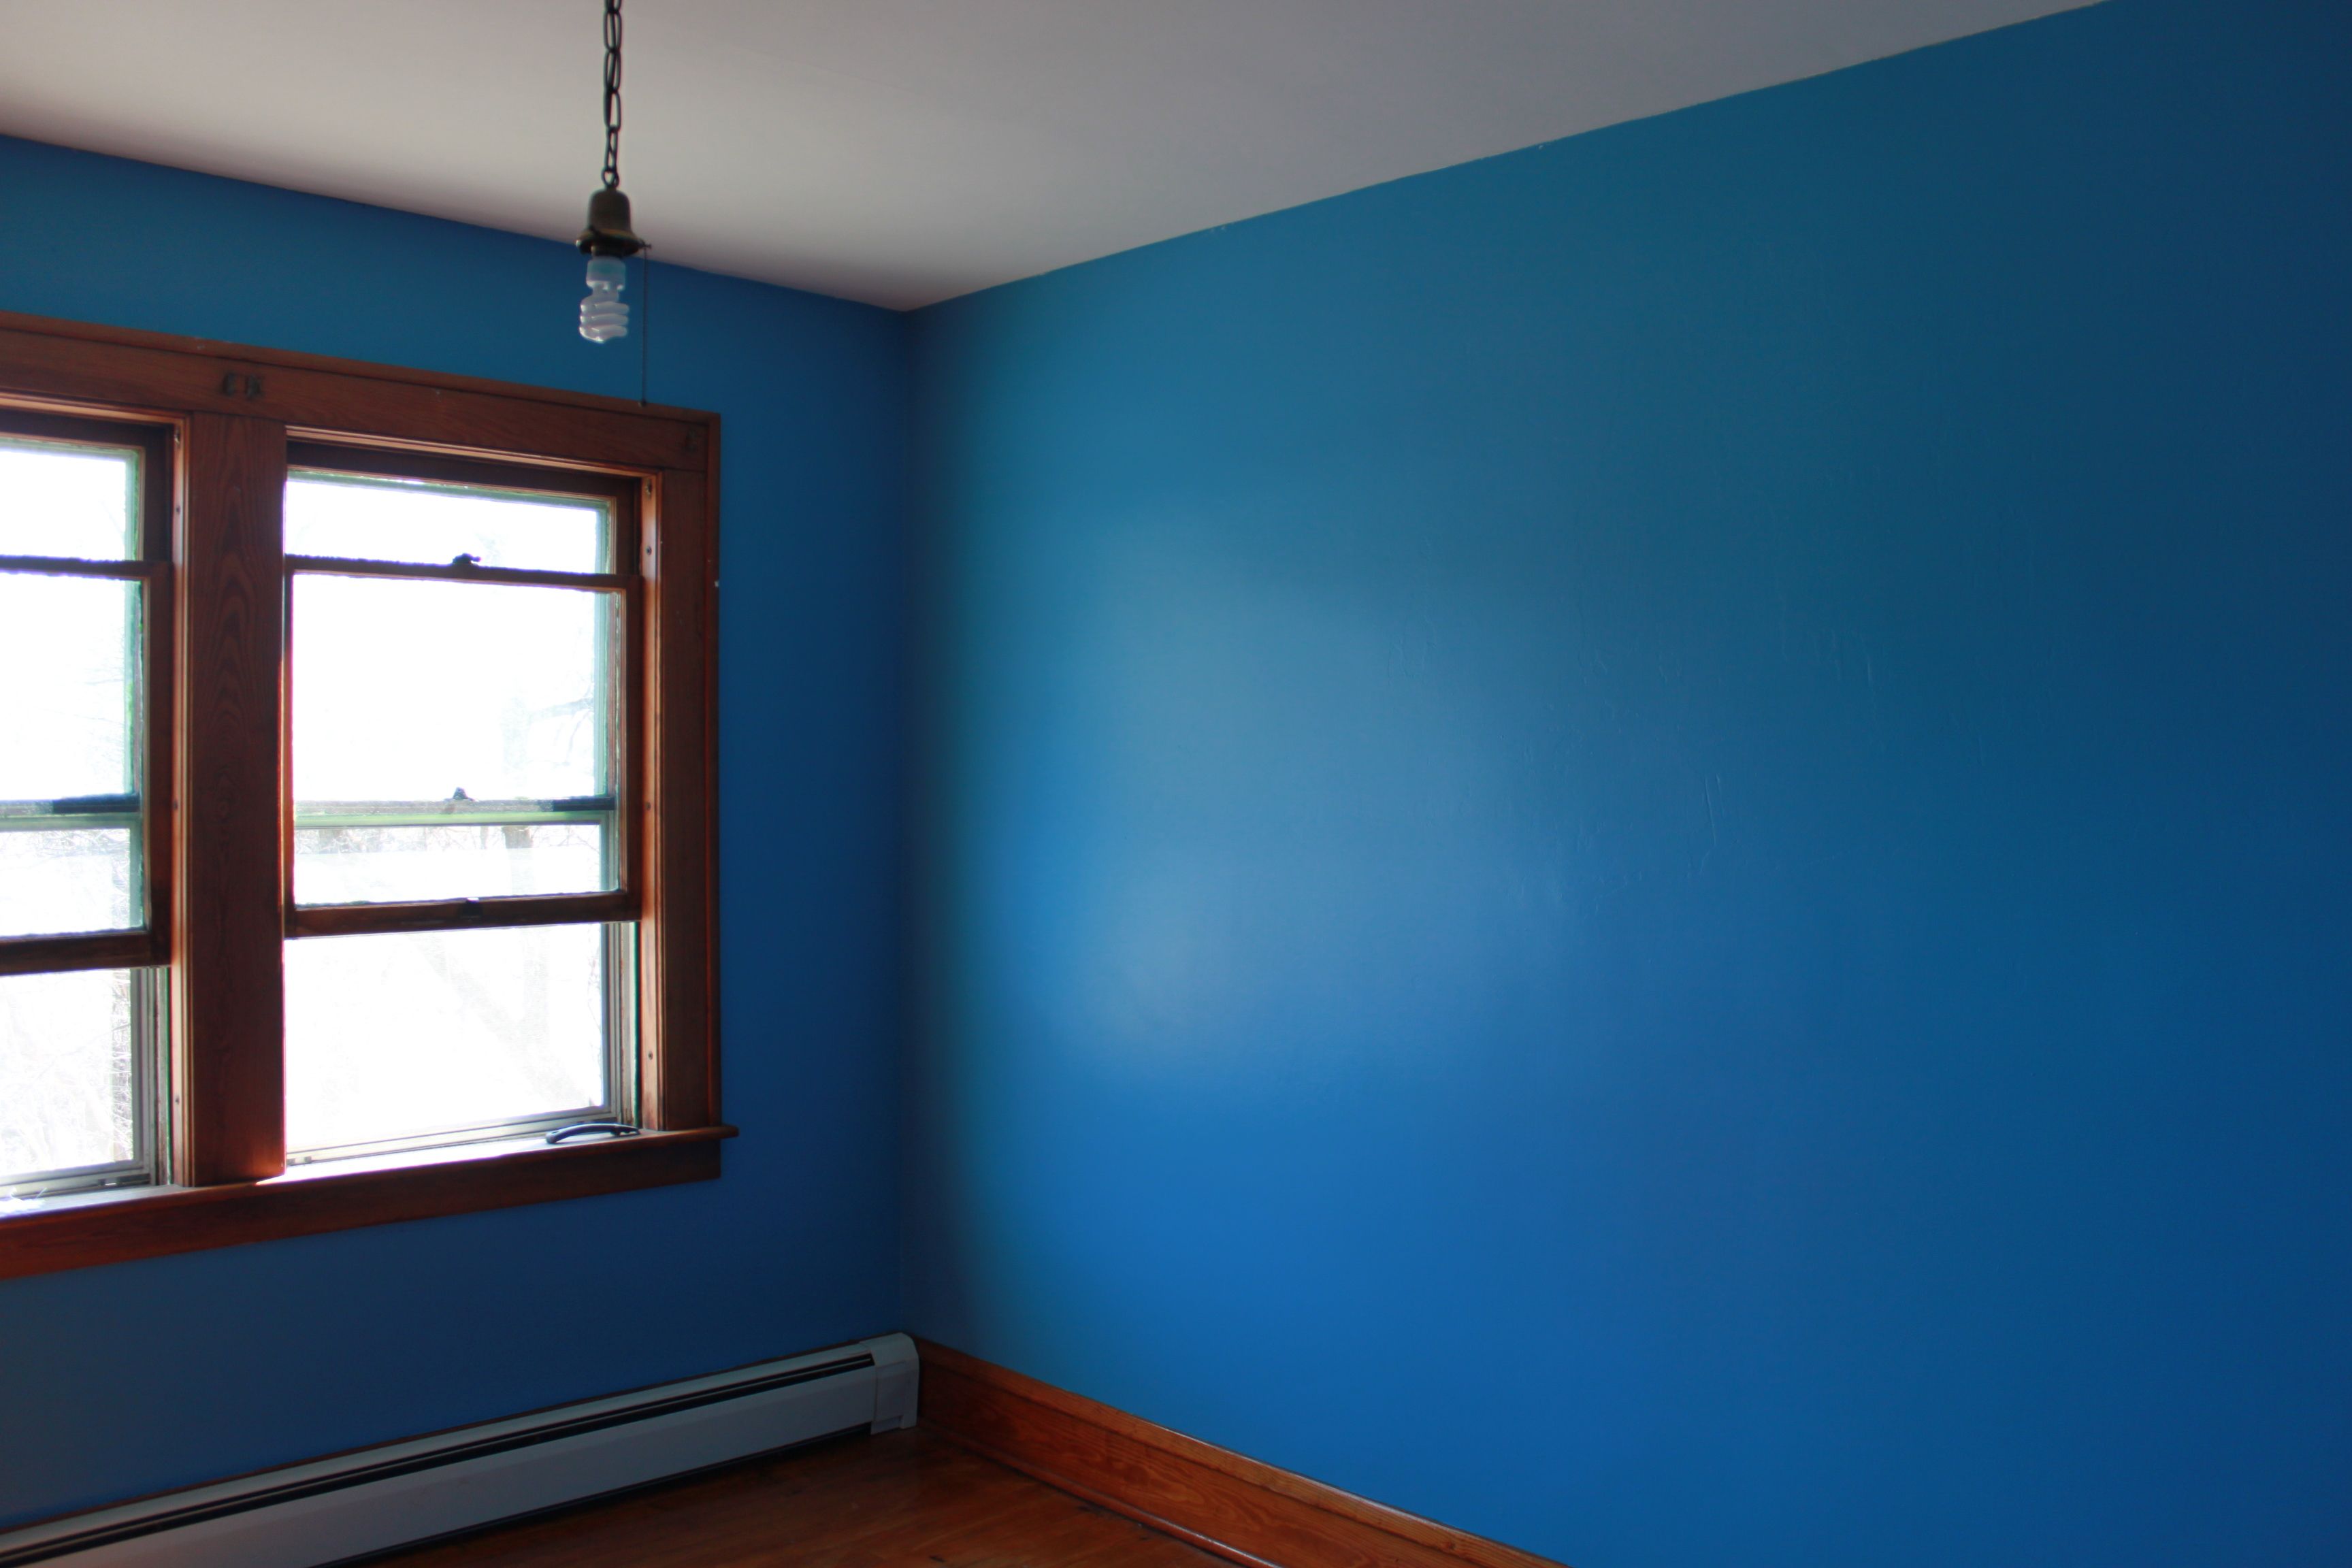 Painting, Alligatoring Paint and Plaster Walls | Blue walls ...